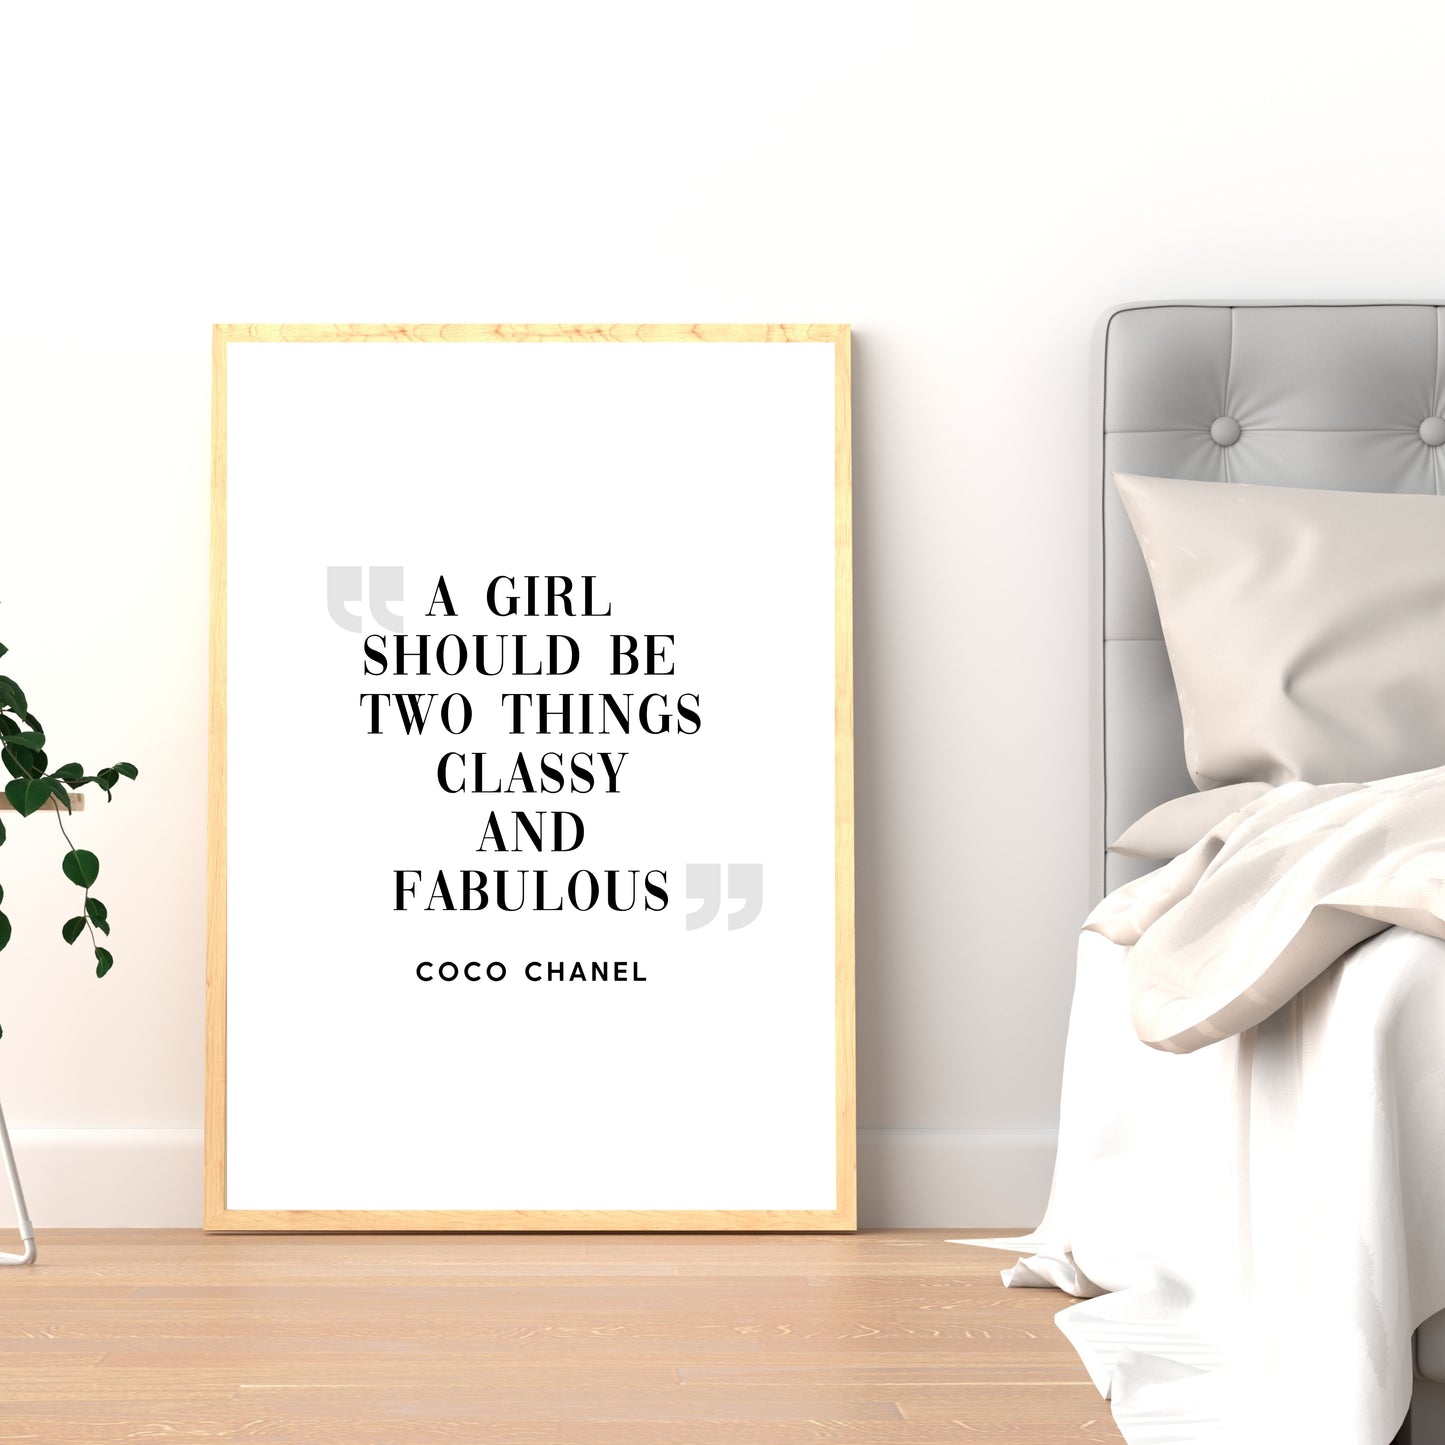 "A Girl Should Be Two Things Classy And Fabulous," Famous Quote by Coco Chanel, Printable Art